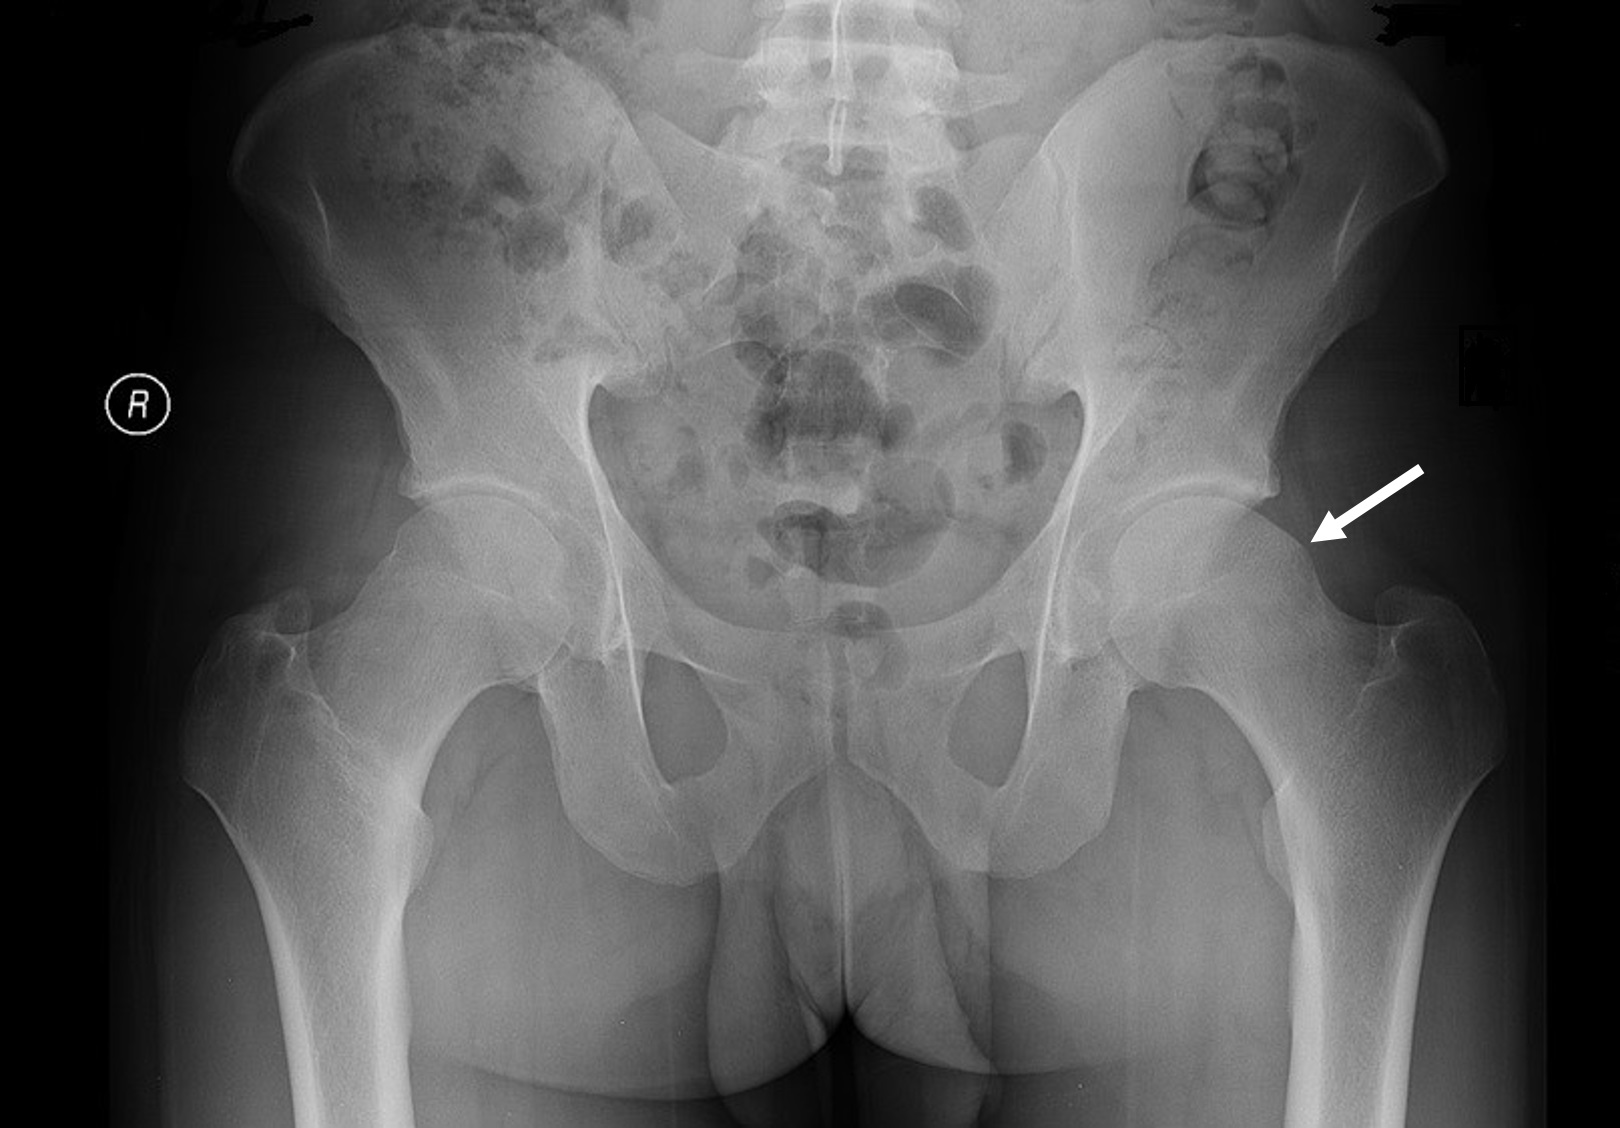 AP pelvis x-ray demonstrating a left hip cam lesion (indicated by white arrow) causing femoroacetabular impingement in this patient. Previous right hip cam lesion was treated with femoral osteoplasty.